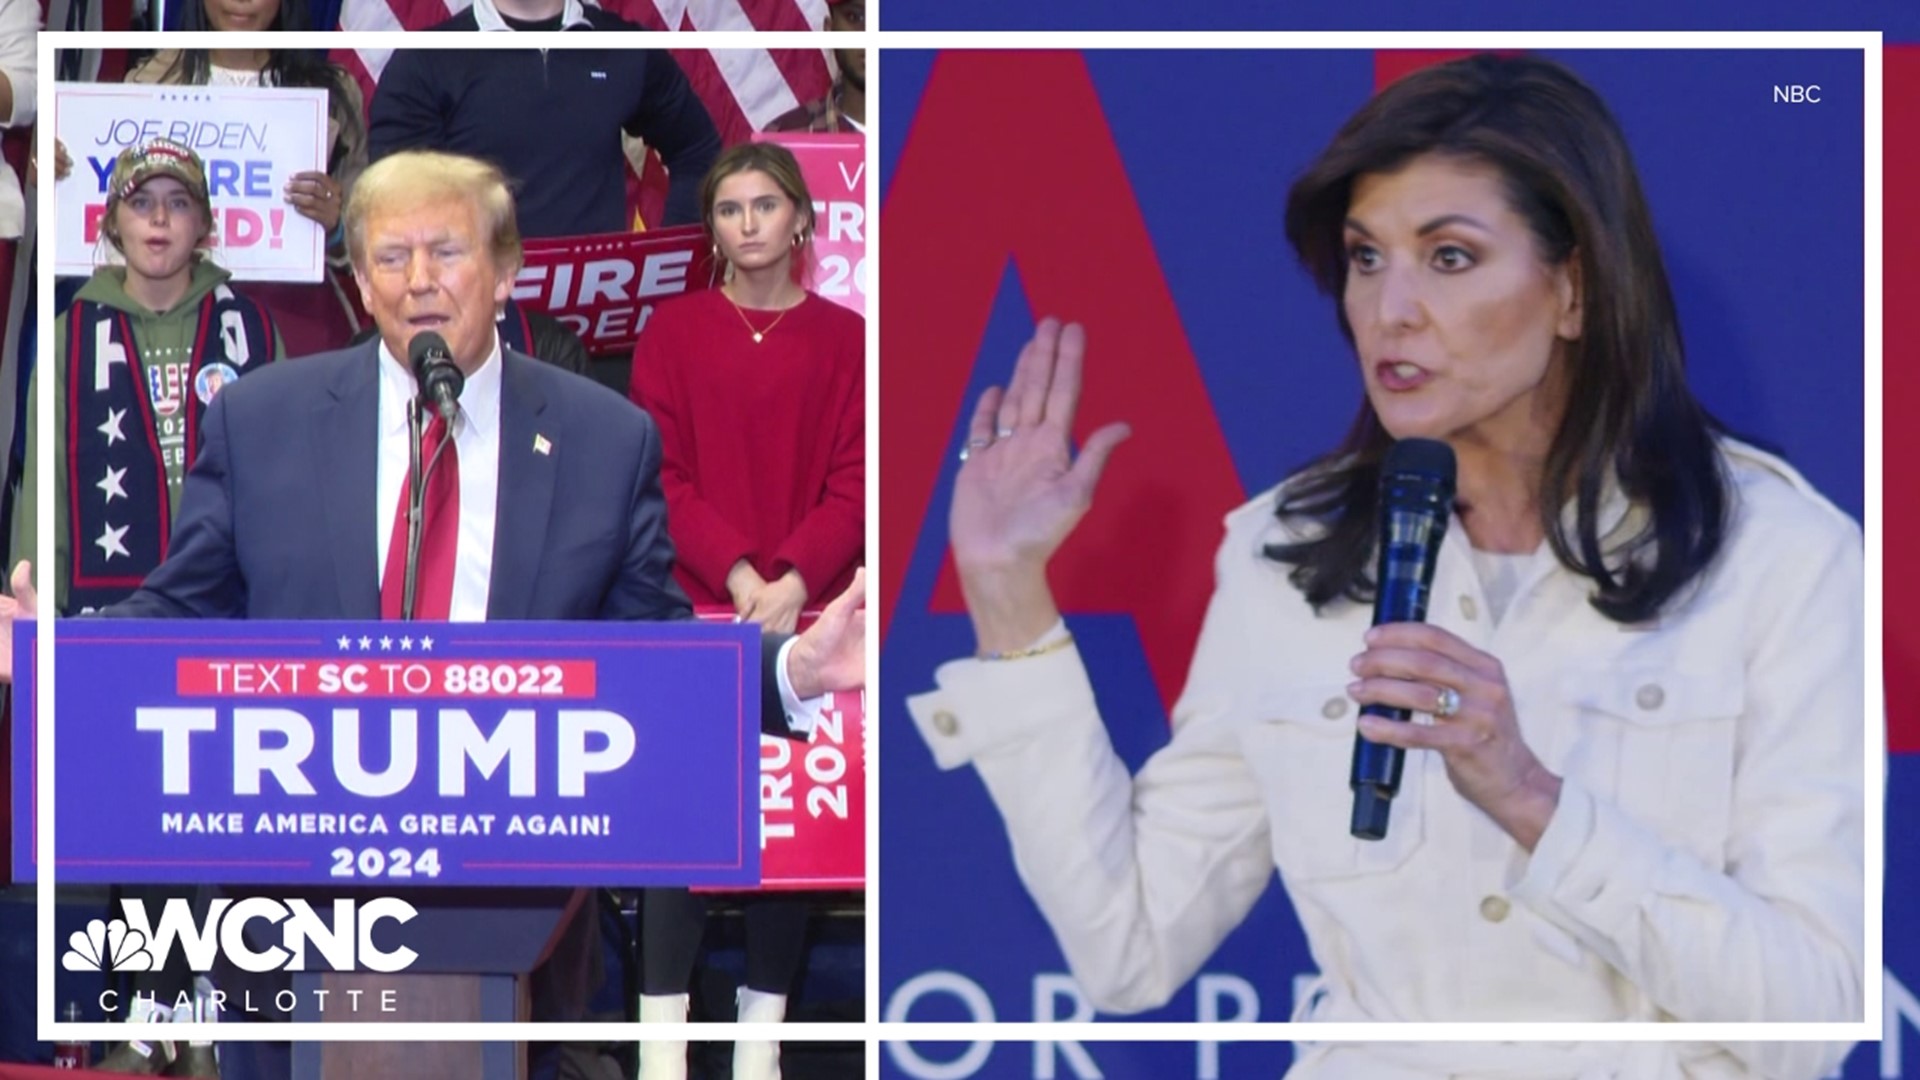 On the eve of the primary, Trump held a rally in Rock Hill and Haley campaigned near Charleston.